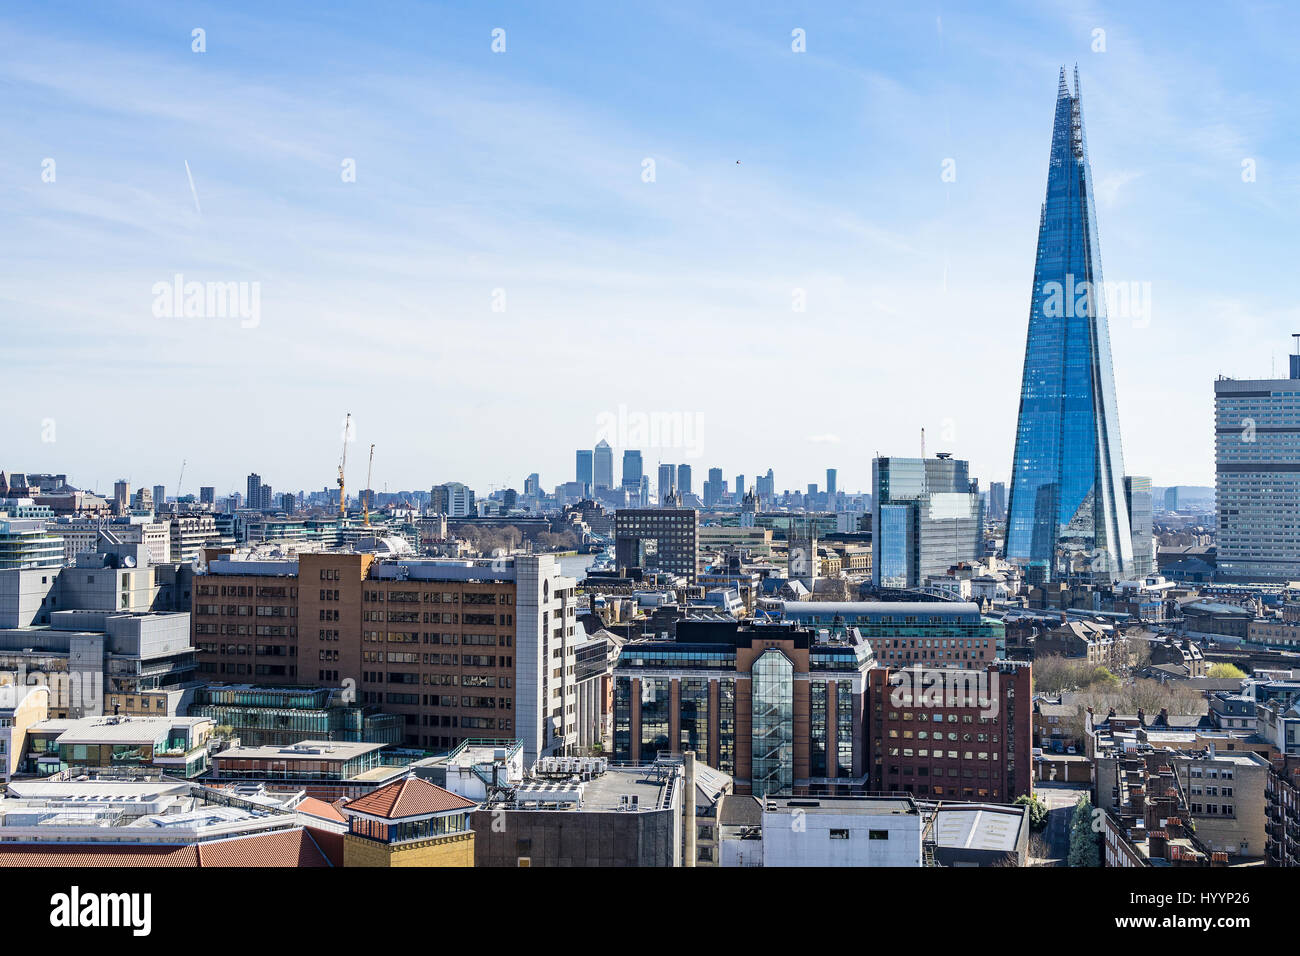 London - March 30: London downtown skyline with the shard on March 30, 2017. Stock Photo